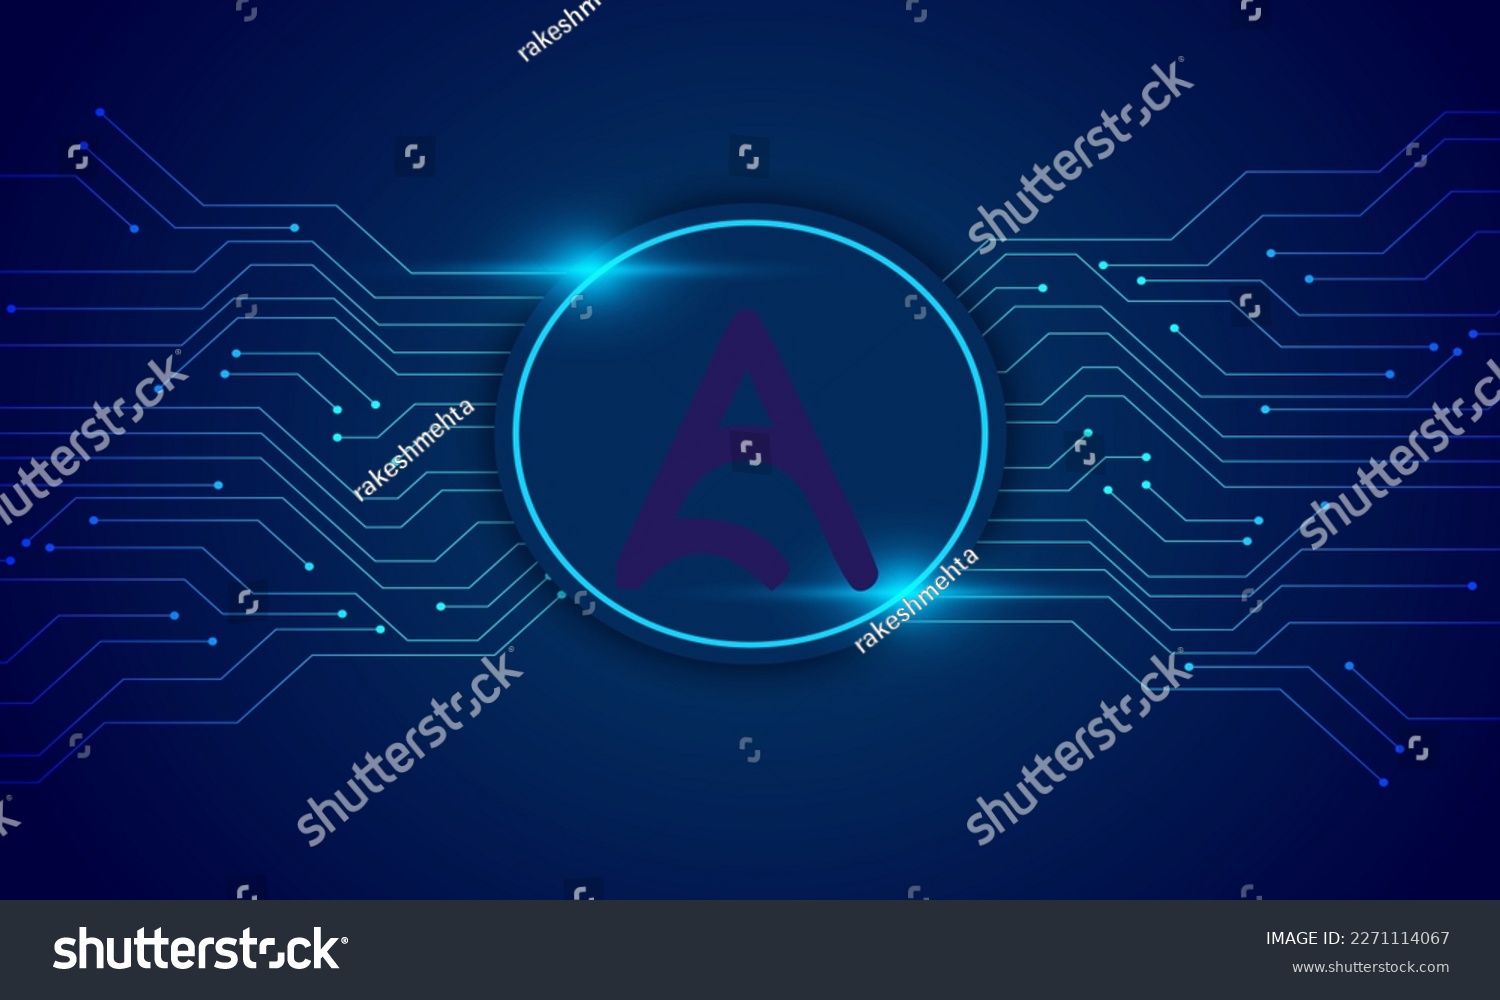 SVG of Alpha Quark Token  logo with crypto currency themed circle background design. Alpha Quark currency vector illustration blockchain technology concept  svg